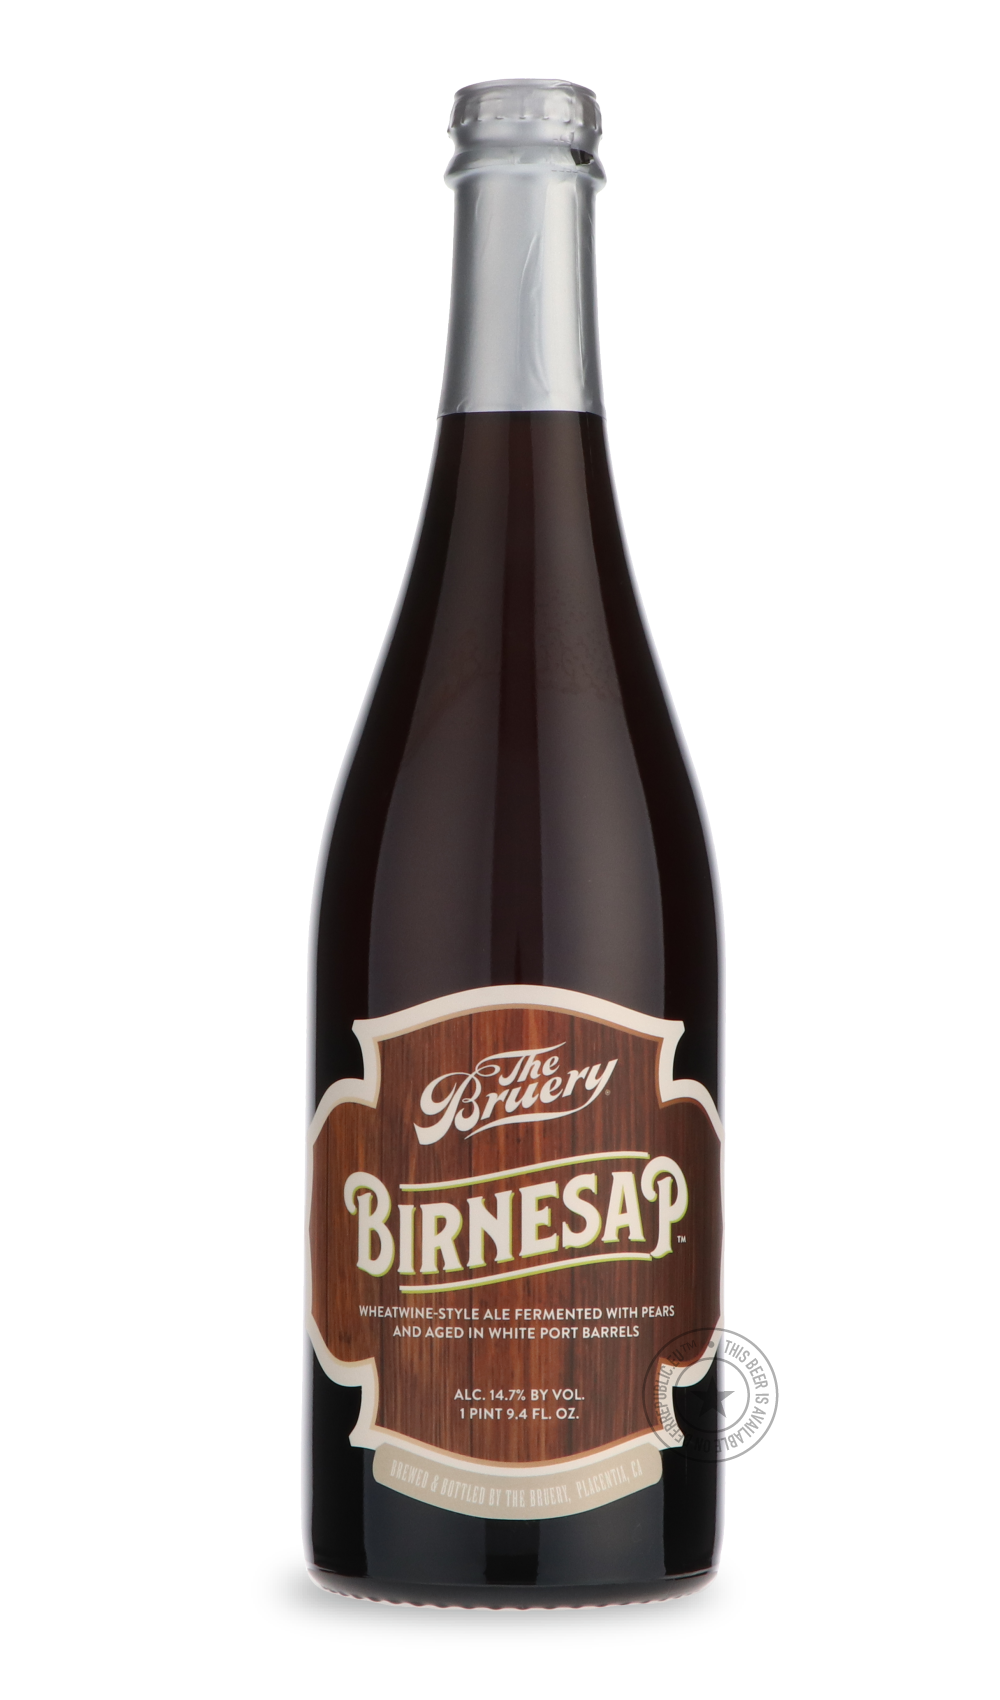 -The Bruery- Birnesap-Brown & Dark- Only @ Beer Republic - The best online beer store for American & Canadian craft beer - Buy beer online from the USA and Canada - Bier online kopen - Amerikaans bier kopen - Craft beer store - Craft beer kopen - Amerikanisch bier kaufen - Bier online kaufen - Acheter biere online - IPA - Stout - Porter - New England IPA - Hazy IPA - Imperial Stout - Barrel Aged - Barrel Aged Imperial Stout - Brown - Dark beer - Blond - Blonde - Pilsner - Lager - Wheat - Weizen - Amber - Ba